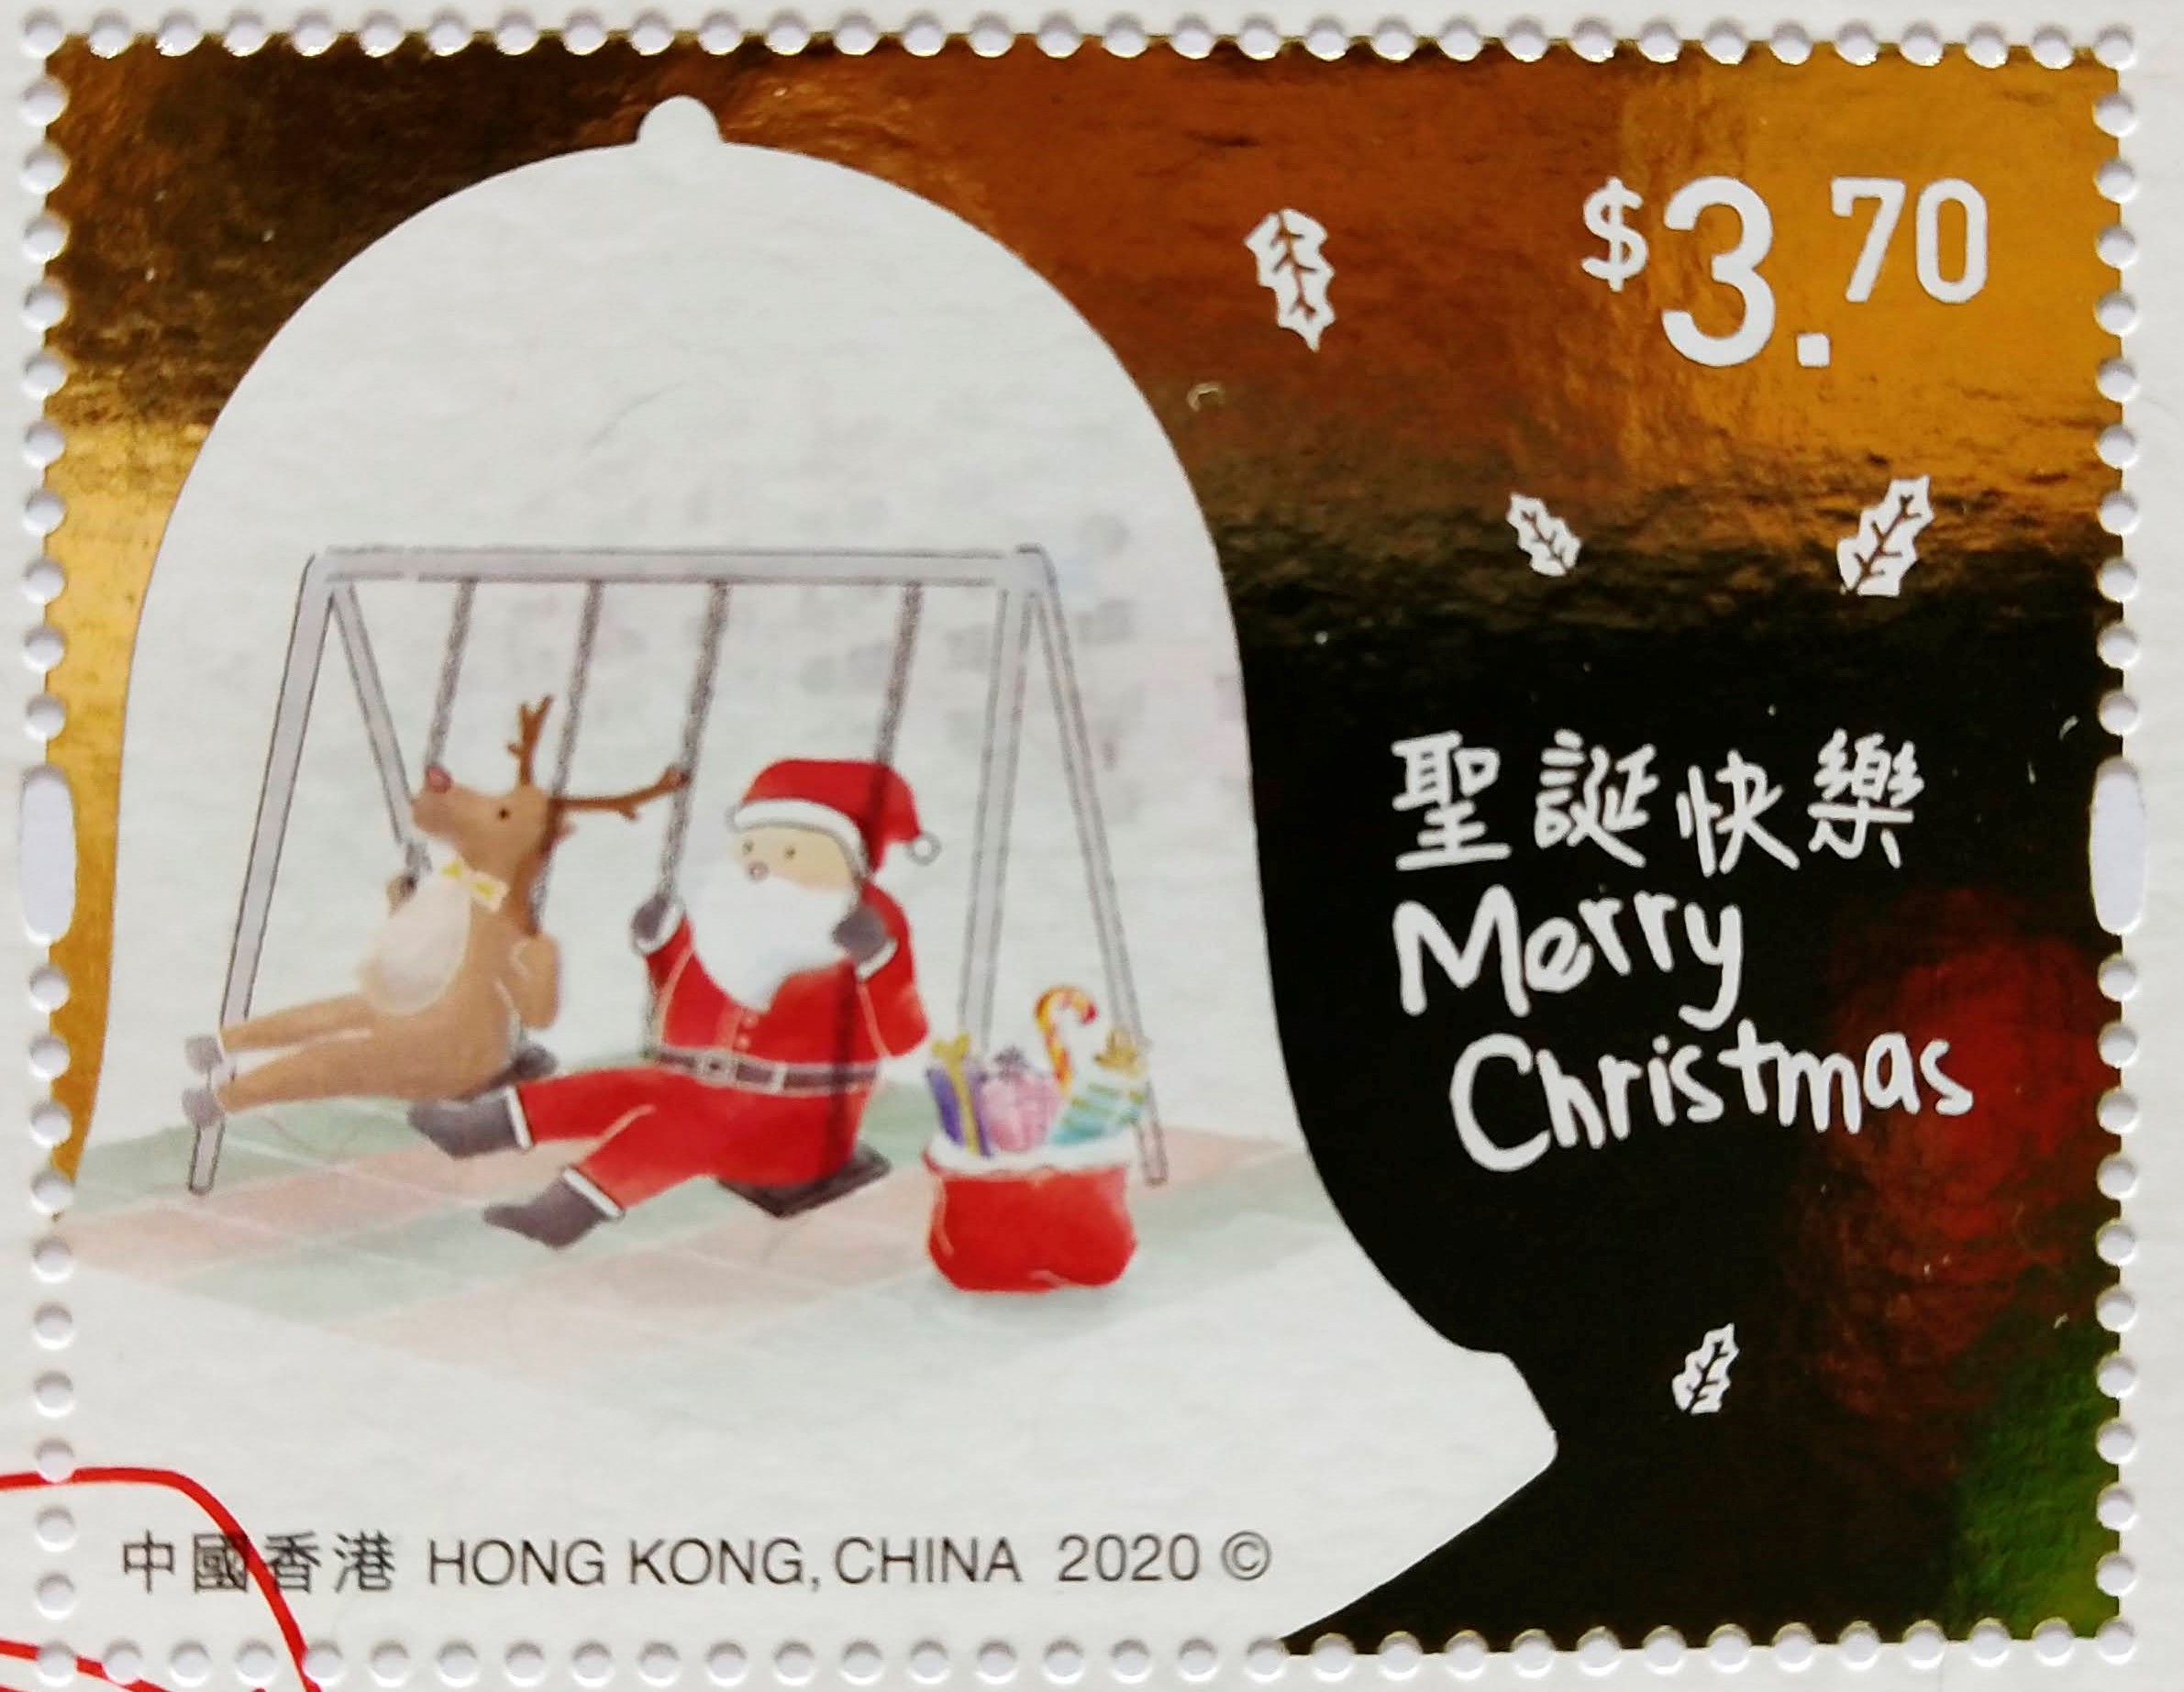 Santa Claus and Reindeer play on swings at playground